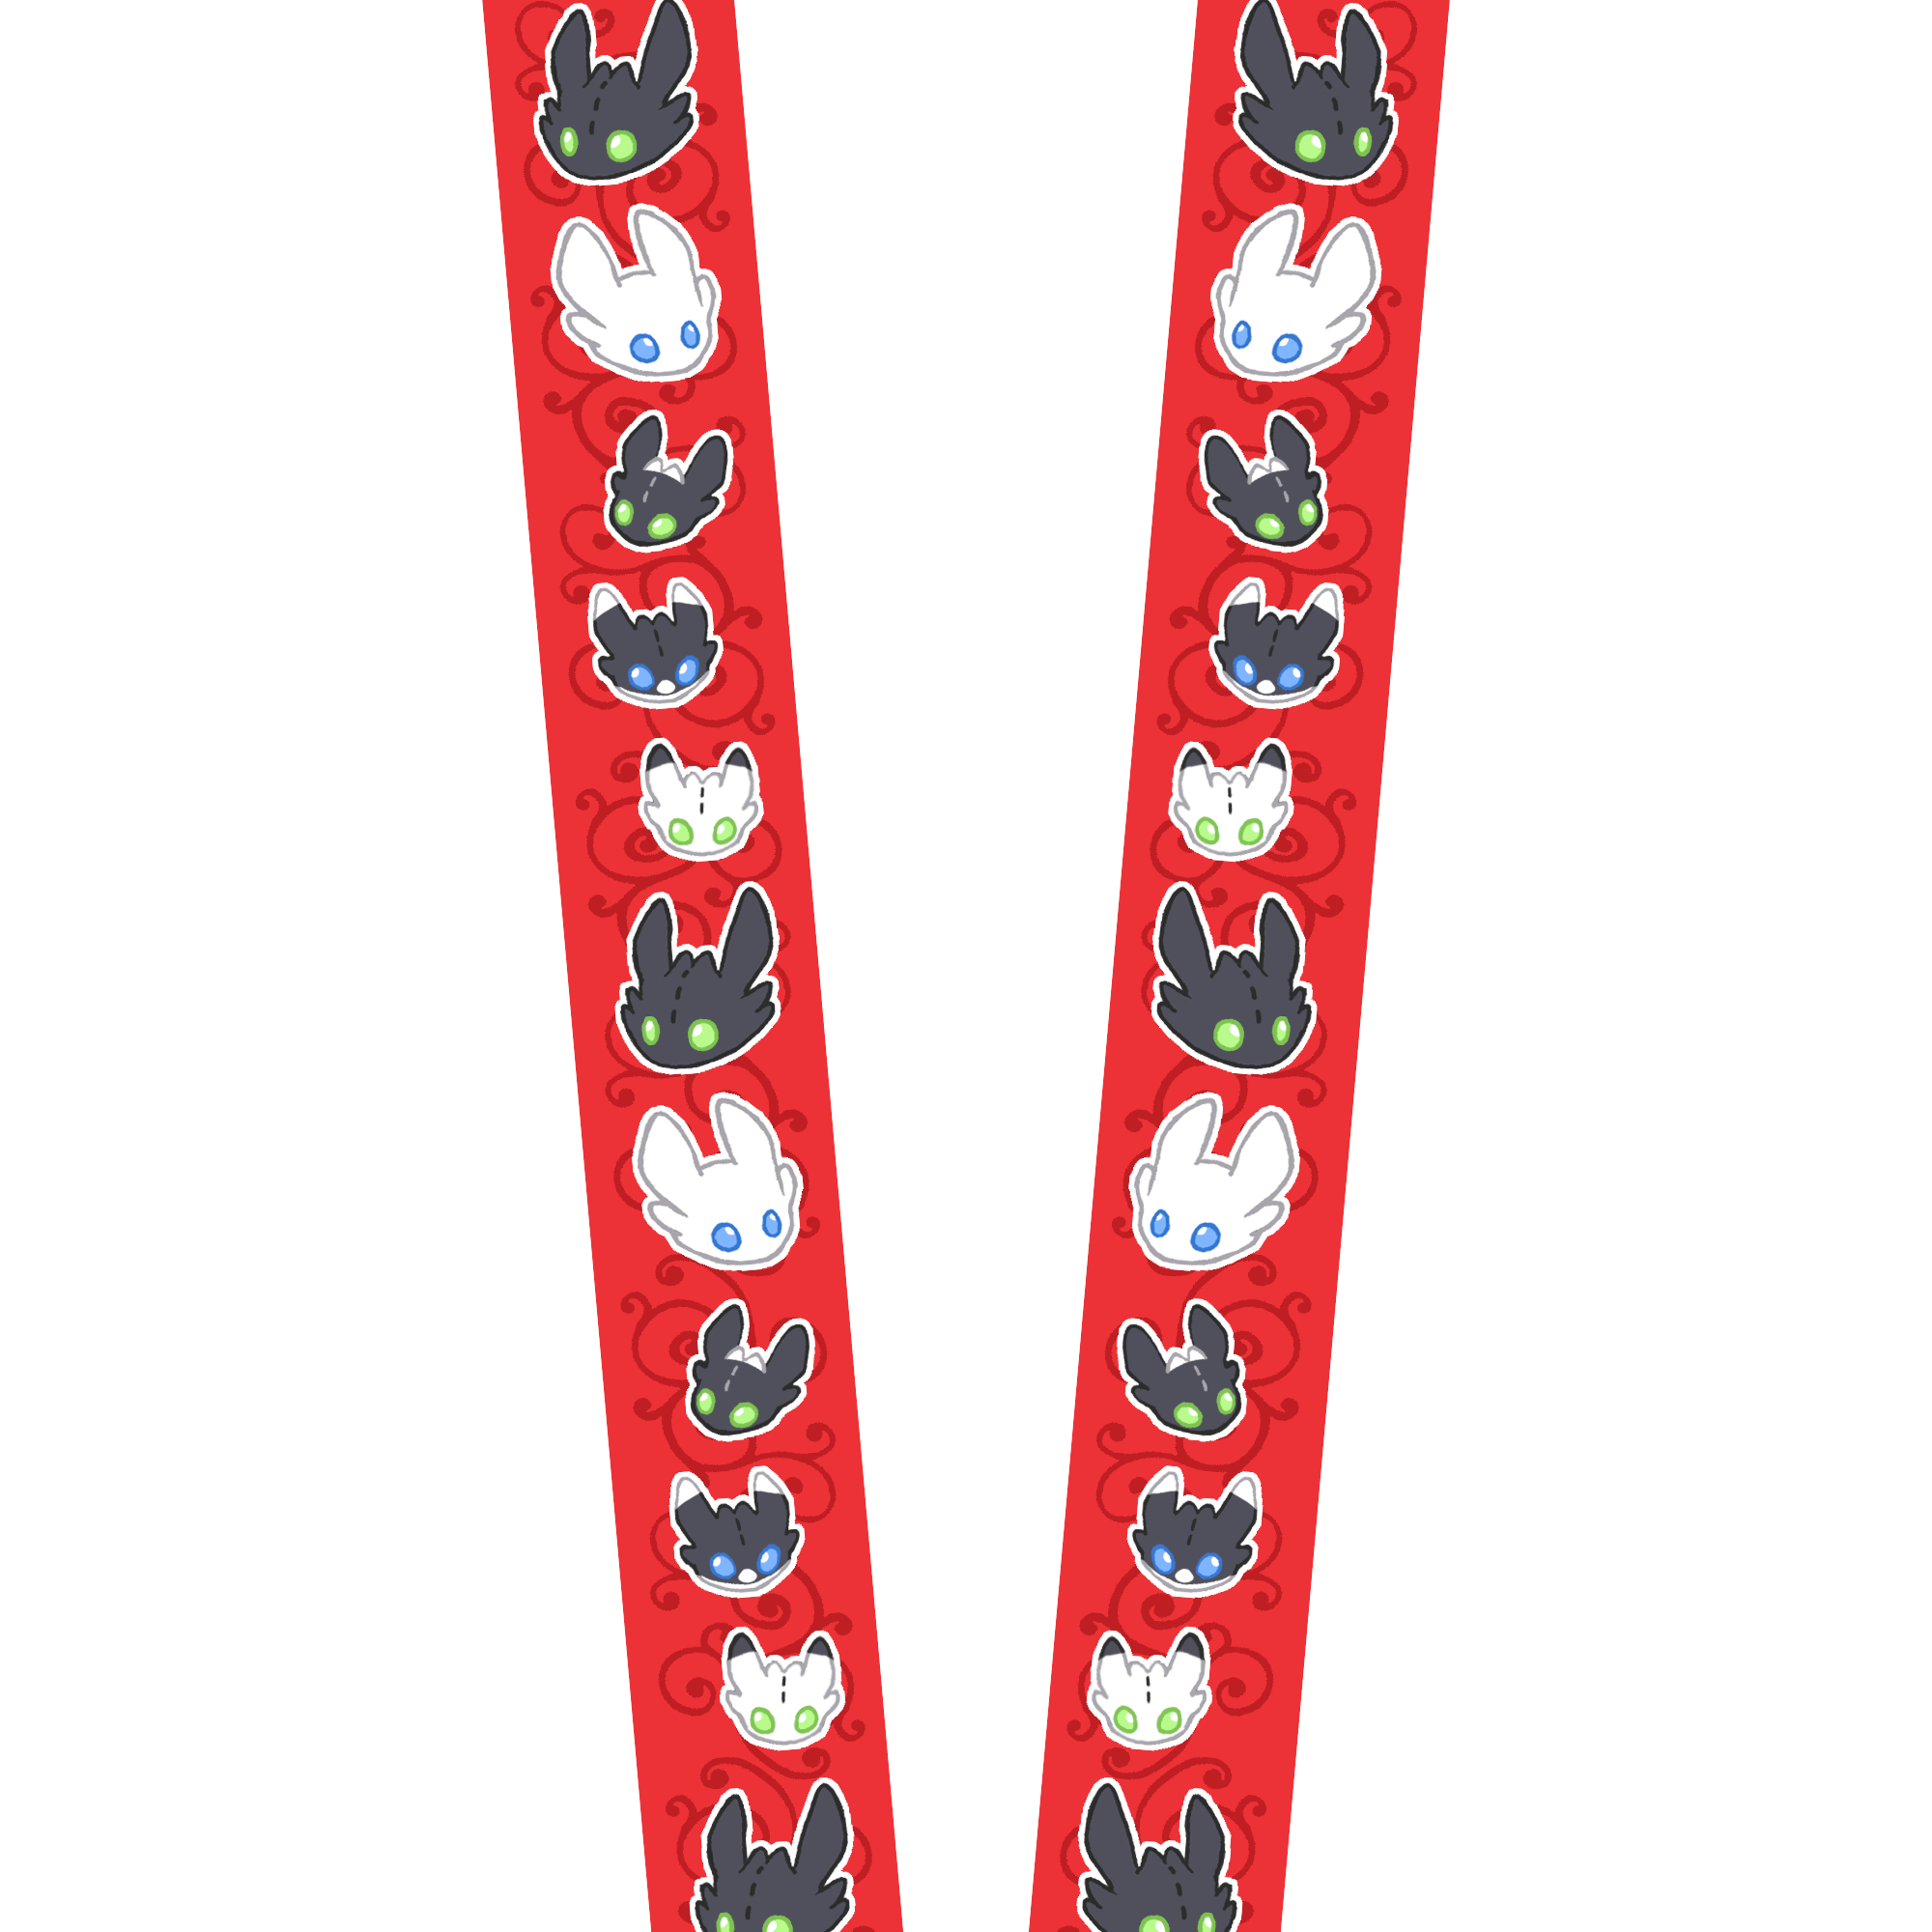 How to Train Your Dragon Lanyard – All the Dwagons